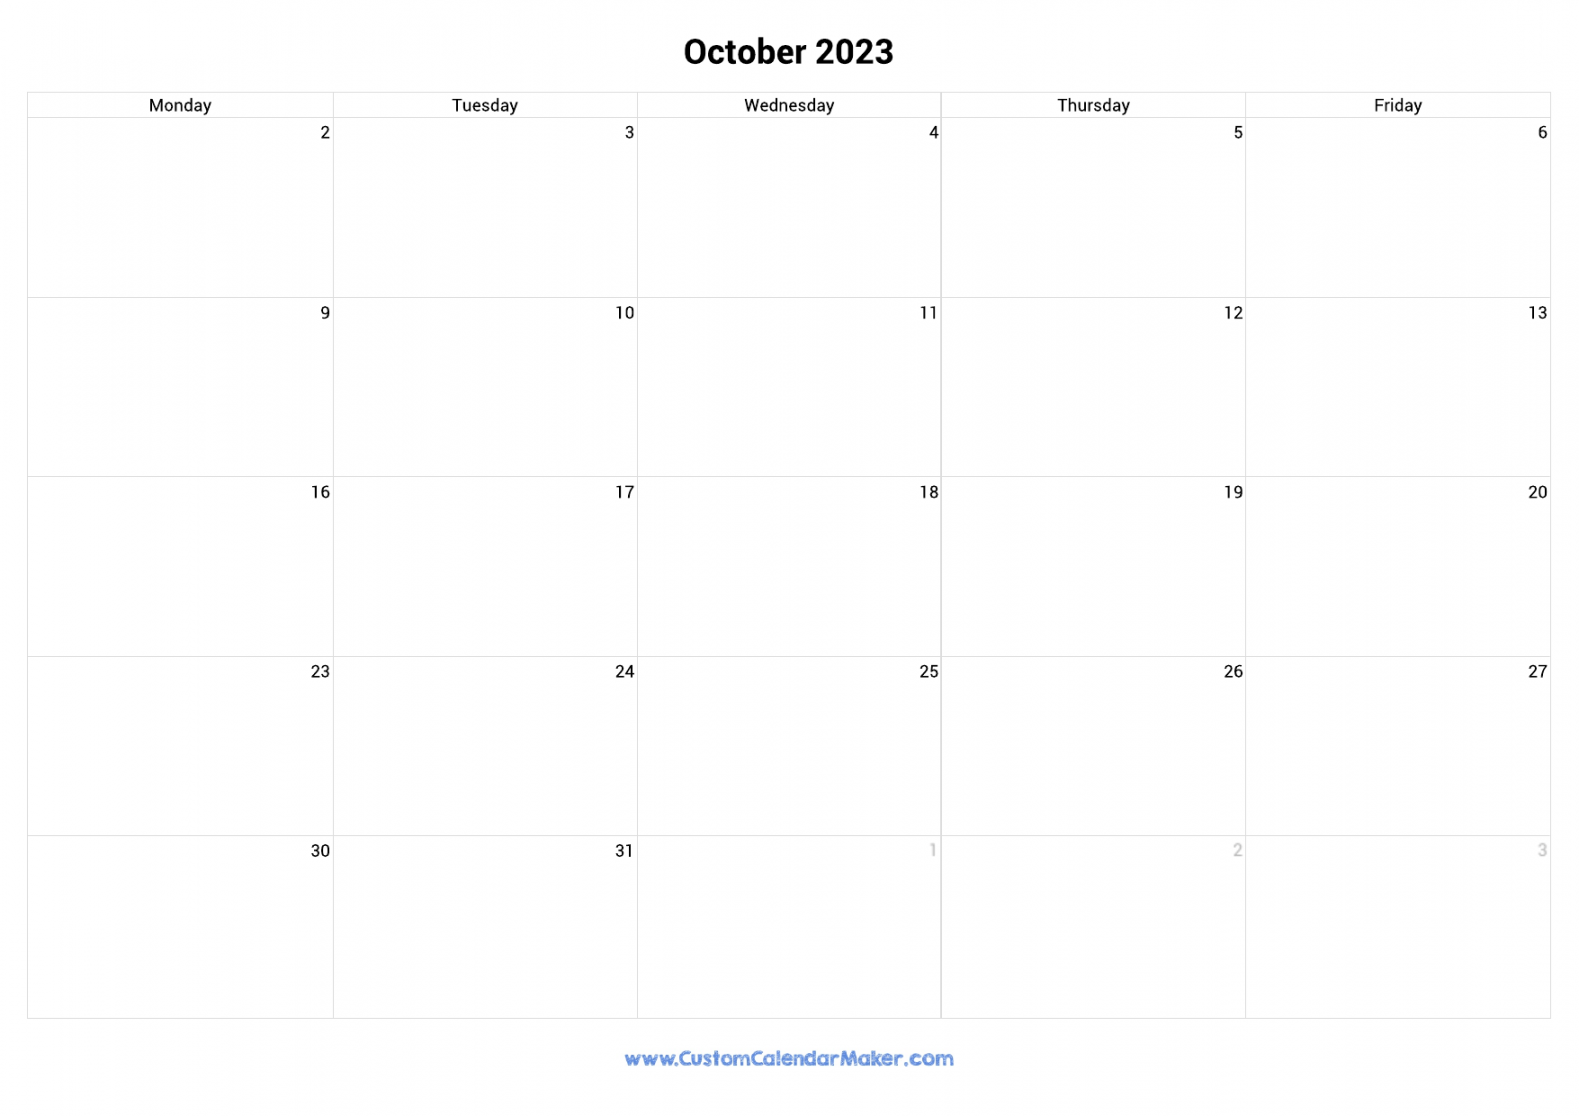 October  Calendar Weekdays Only  Monday to Friday